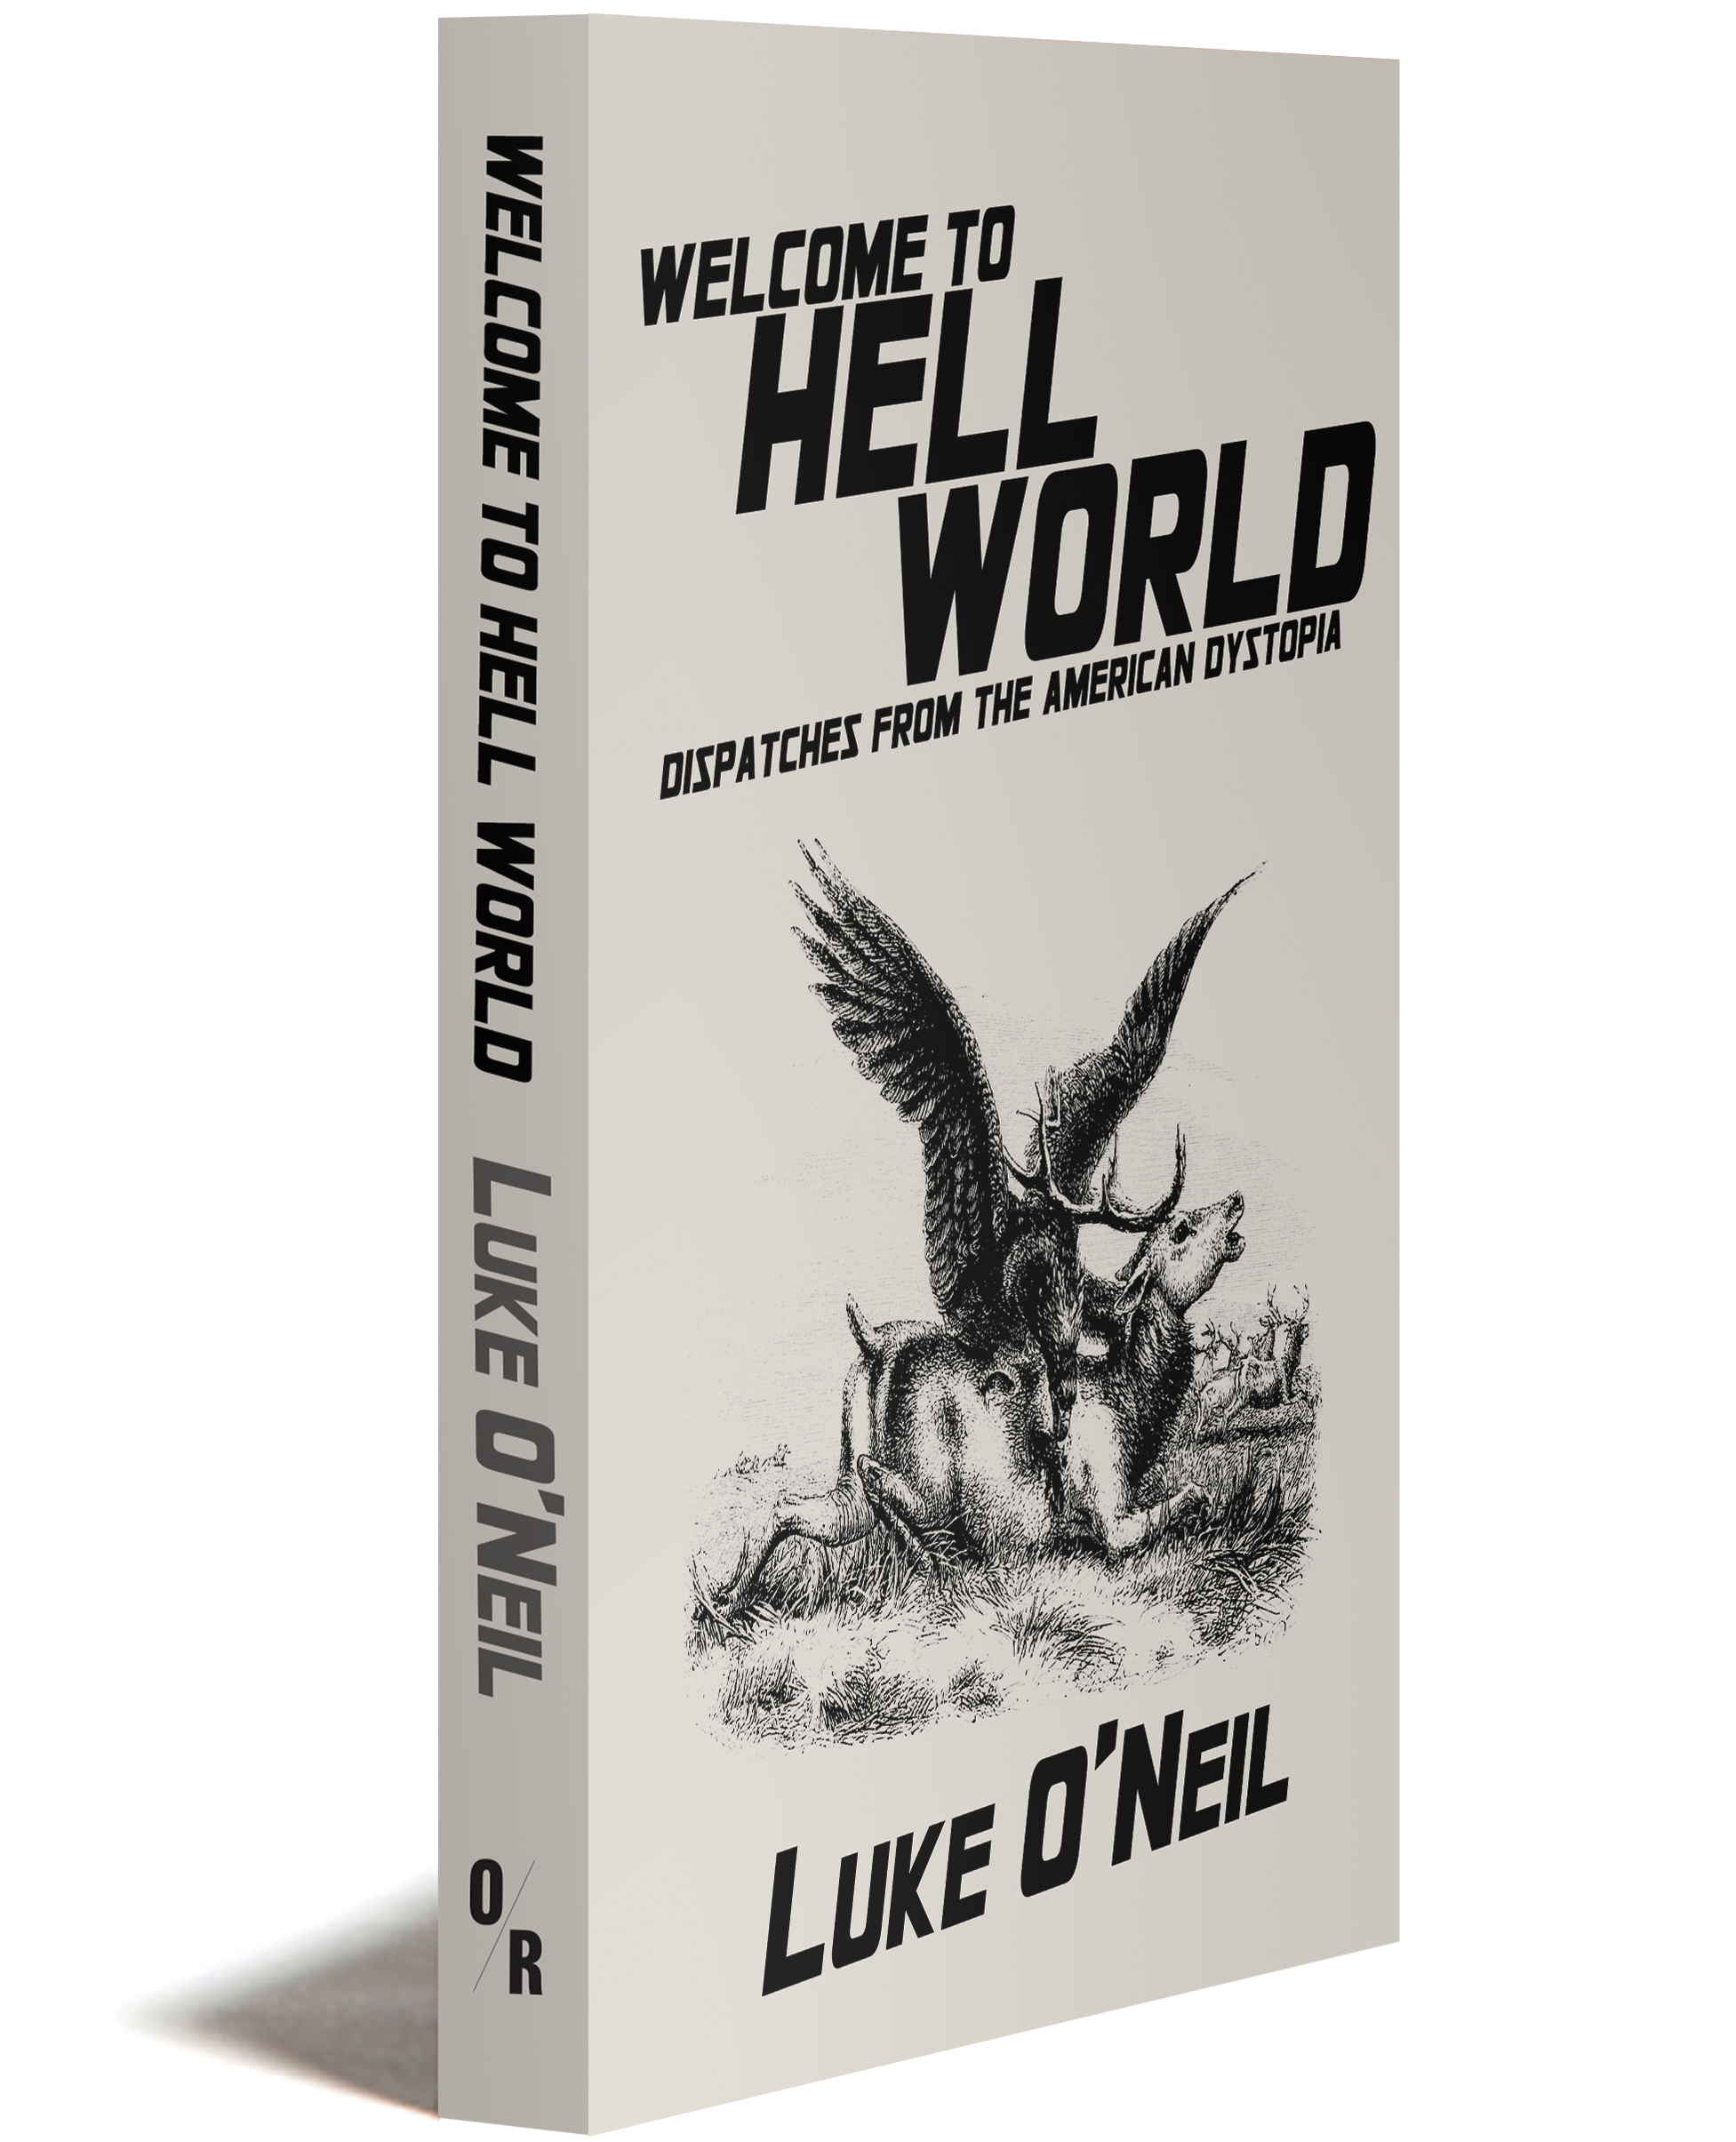 Welcome to hell world eagle cover